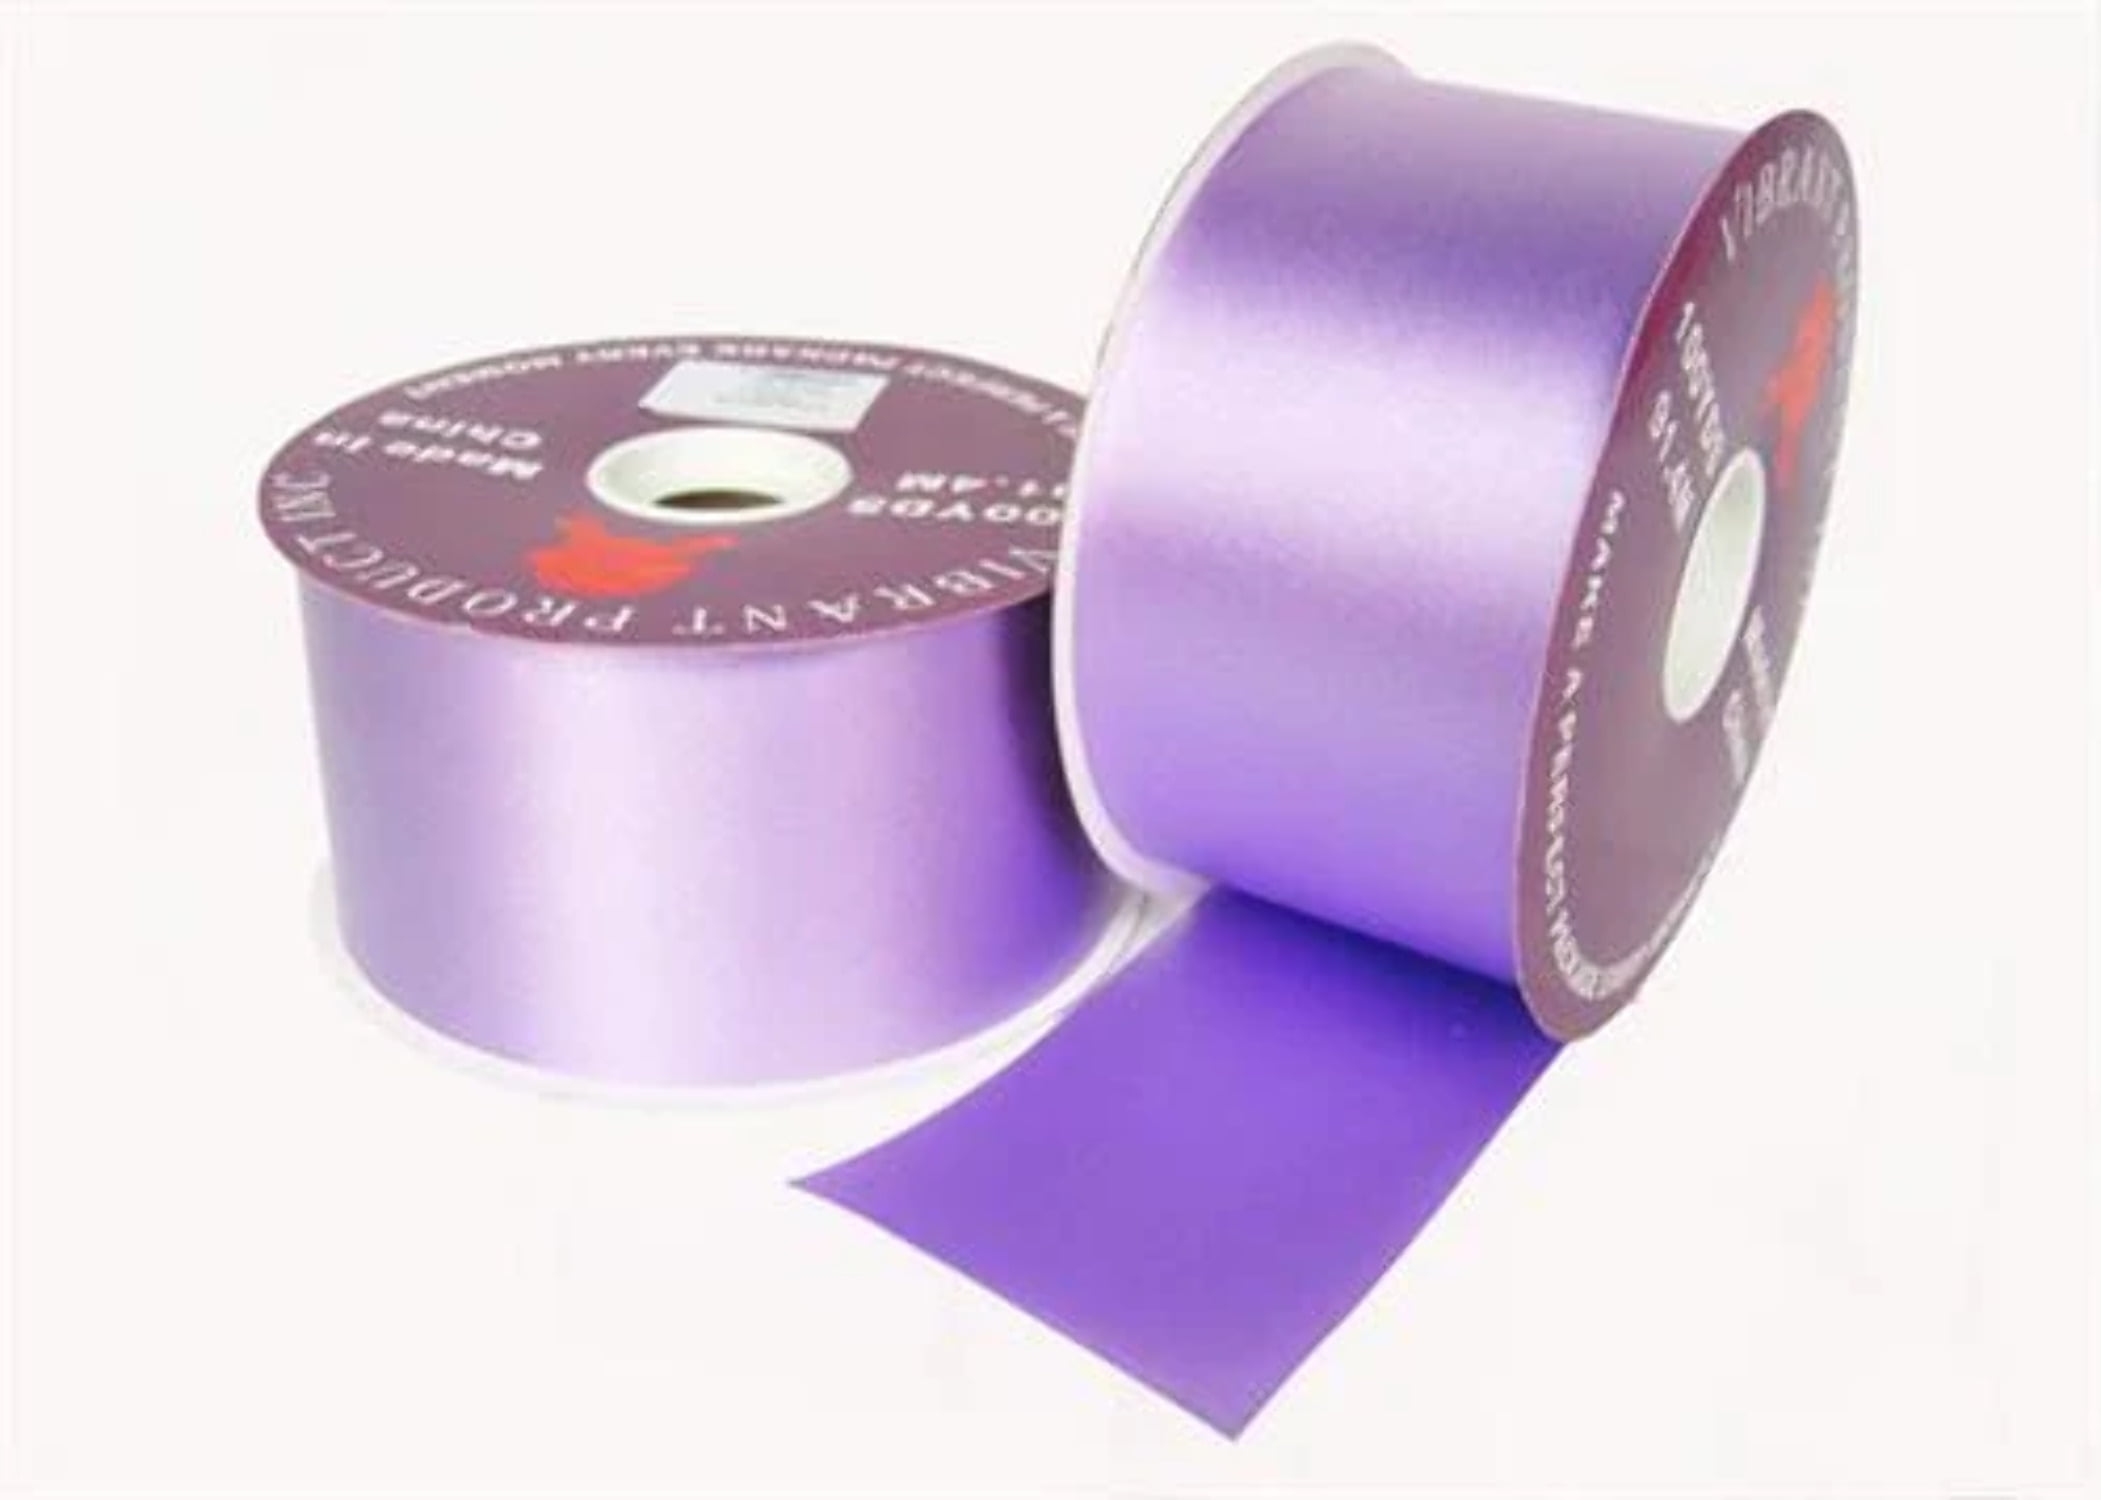 Reliant Ribbon - 5000-908-09C, Double Face Satin Charm Dfs Ribbon, Scarlet,  1-1/2 Inch, 100 Yards 